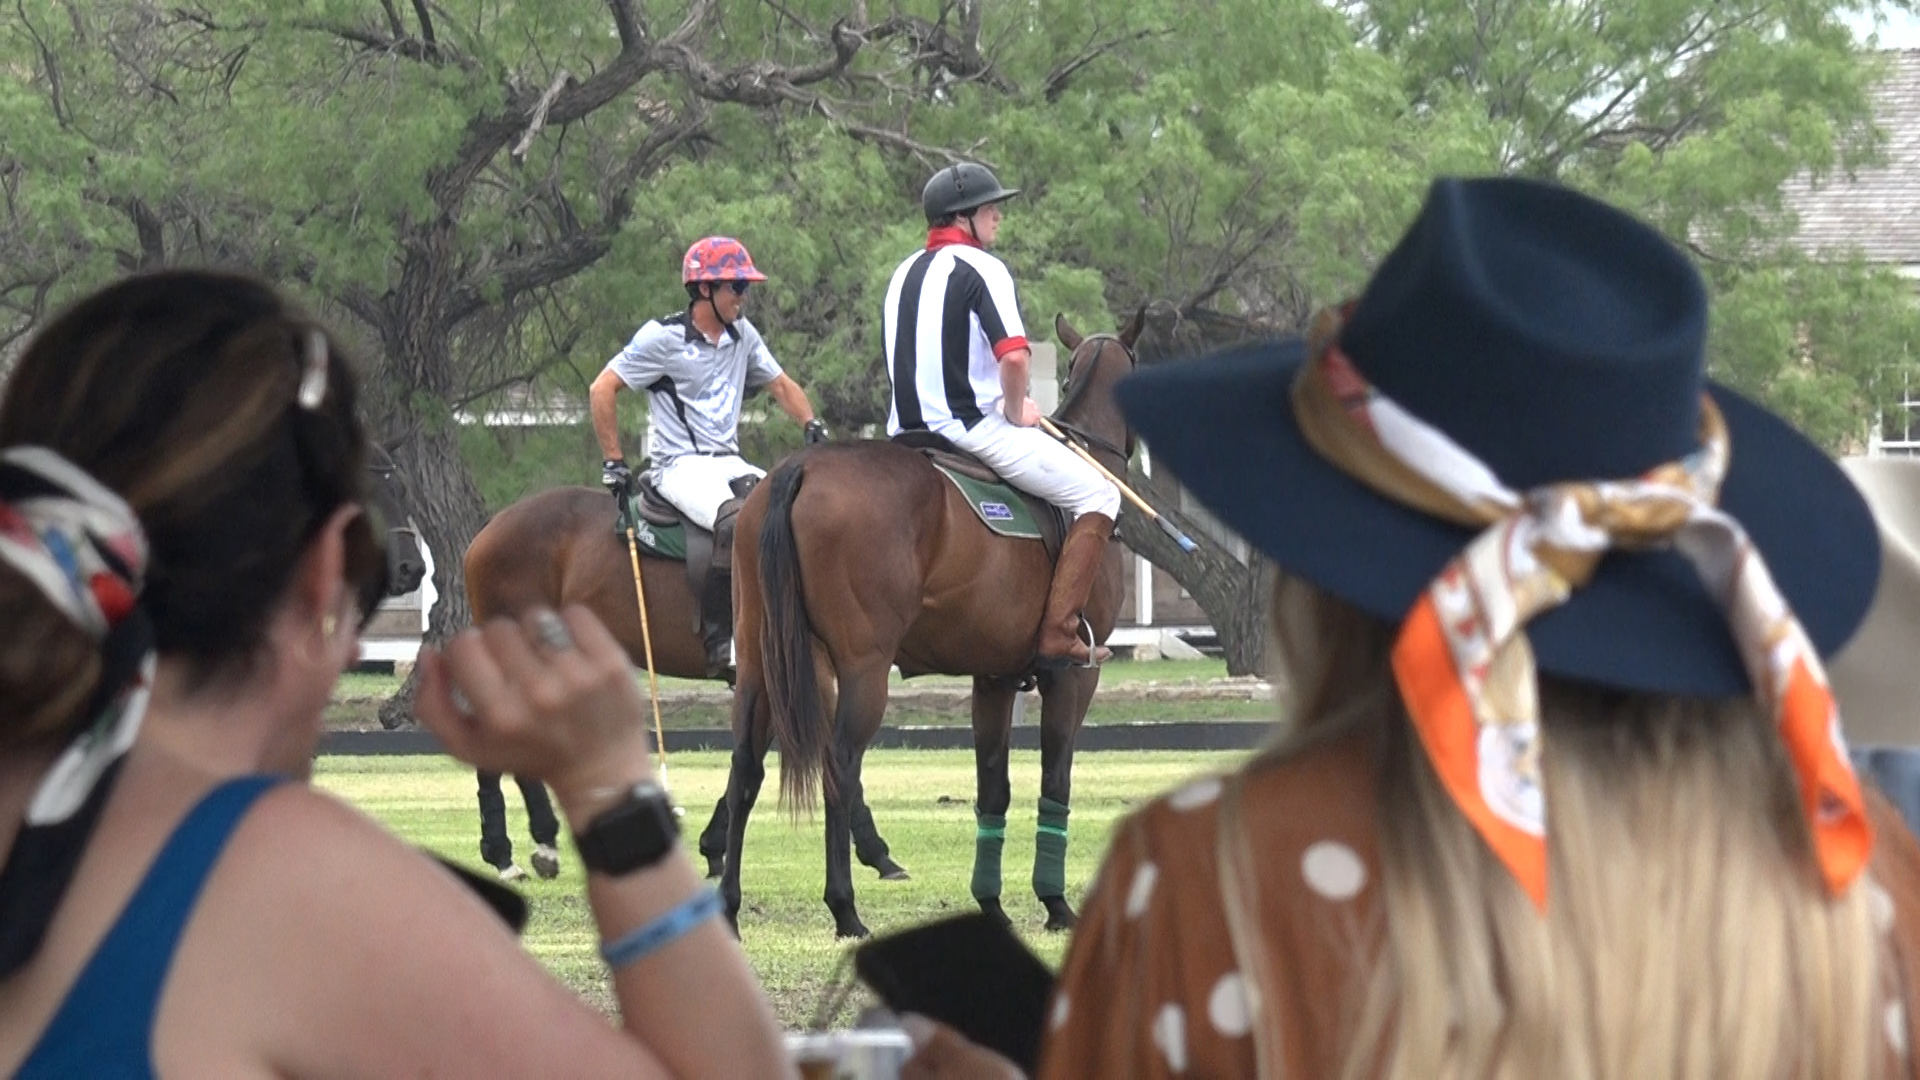 Polo on the Concho was back again Saturday to celebrate San Angelo's rich history with the sport.